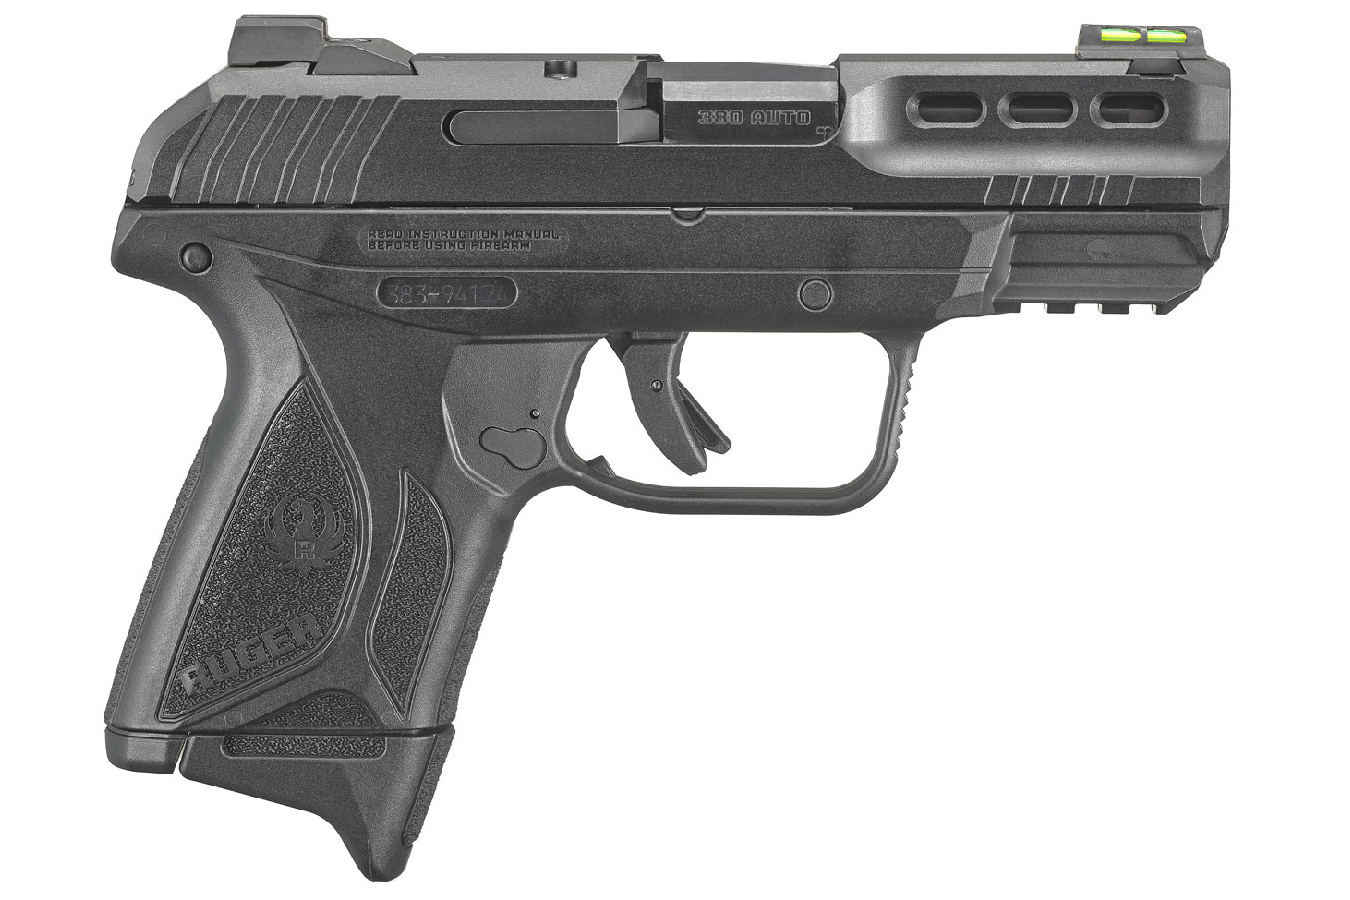 RUGER SECURITY 380 PISTOL 380 ACP 3.42 IN BBL 15 RD MAG